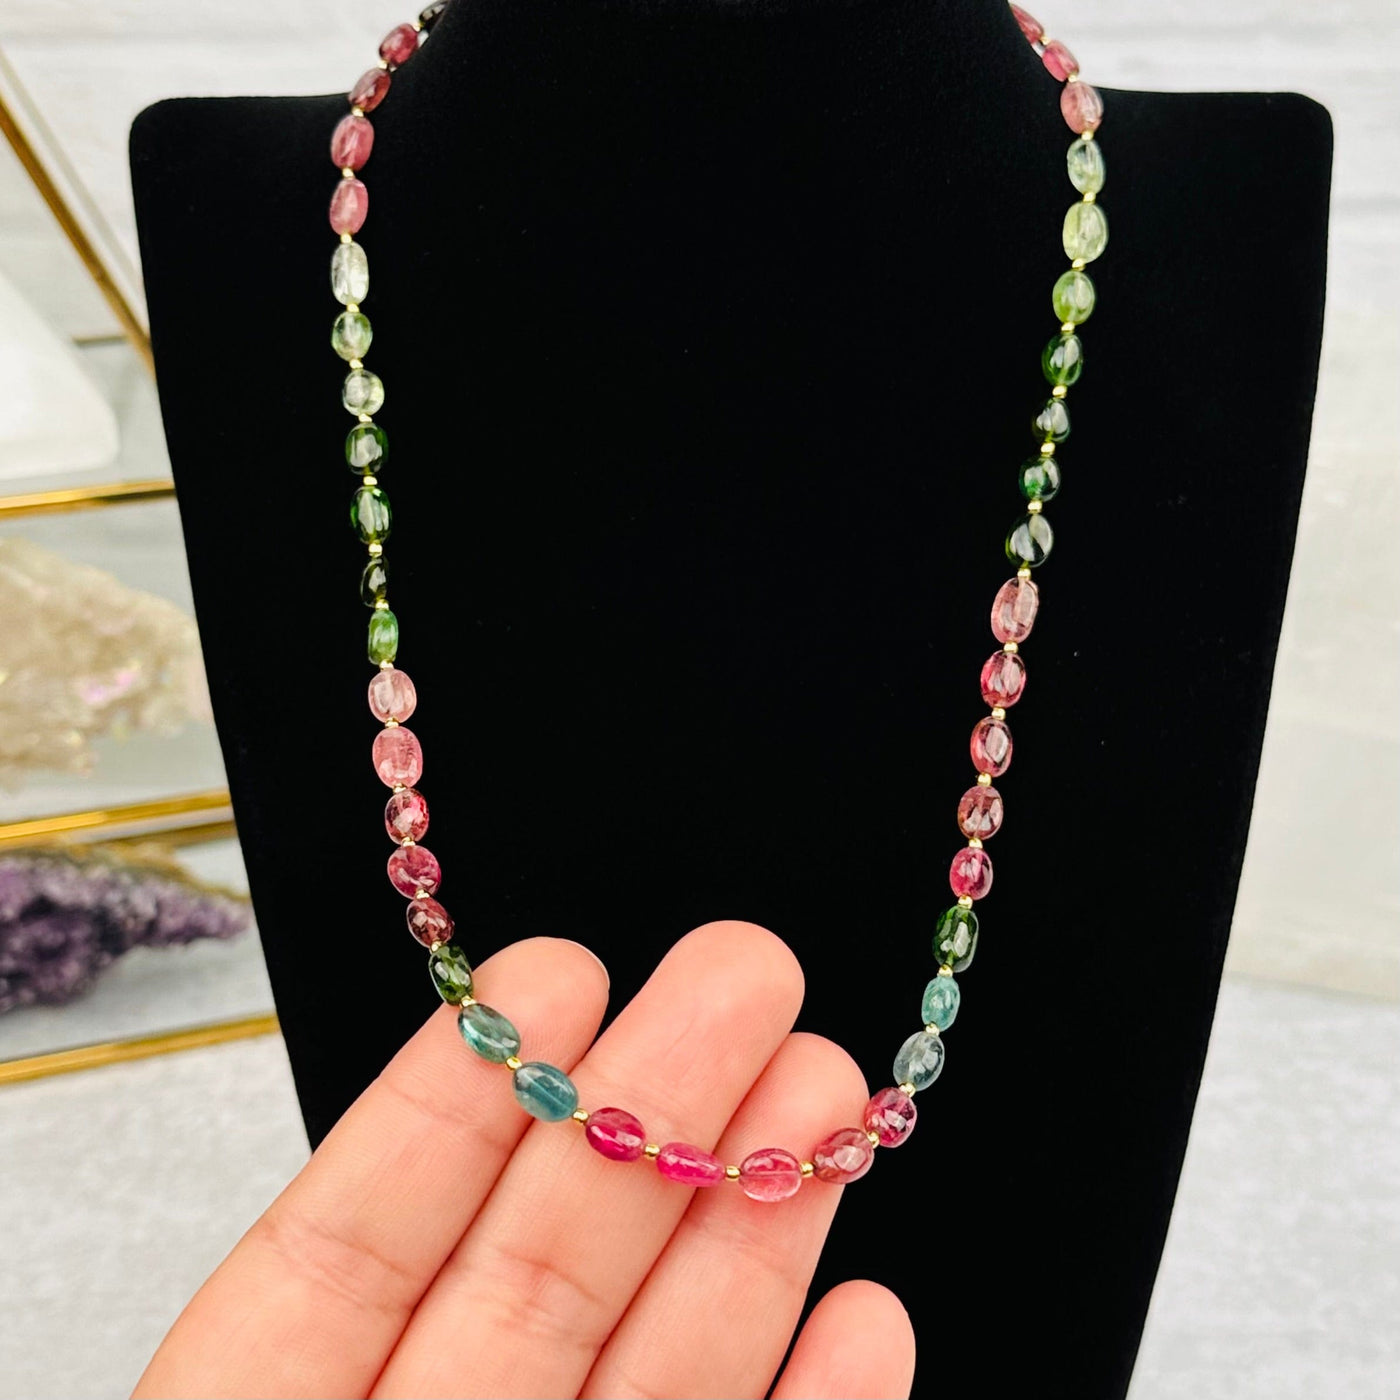 Polished Watermelon Tourmaline Necklace in hand for size reference